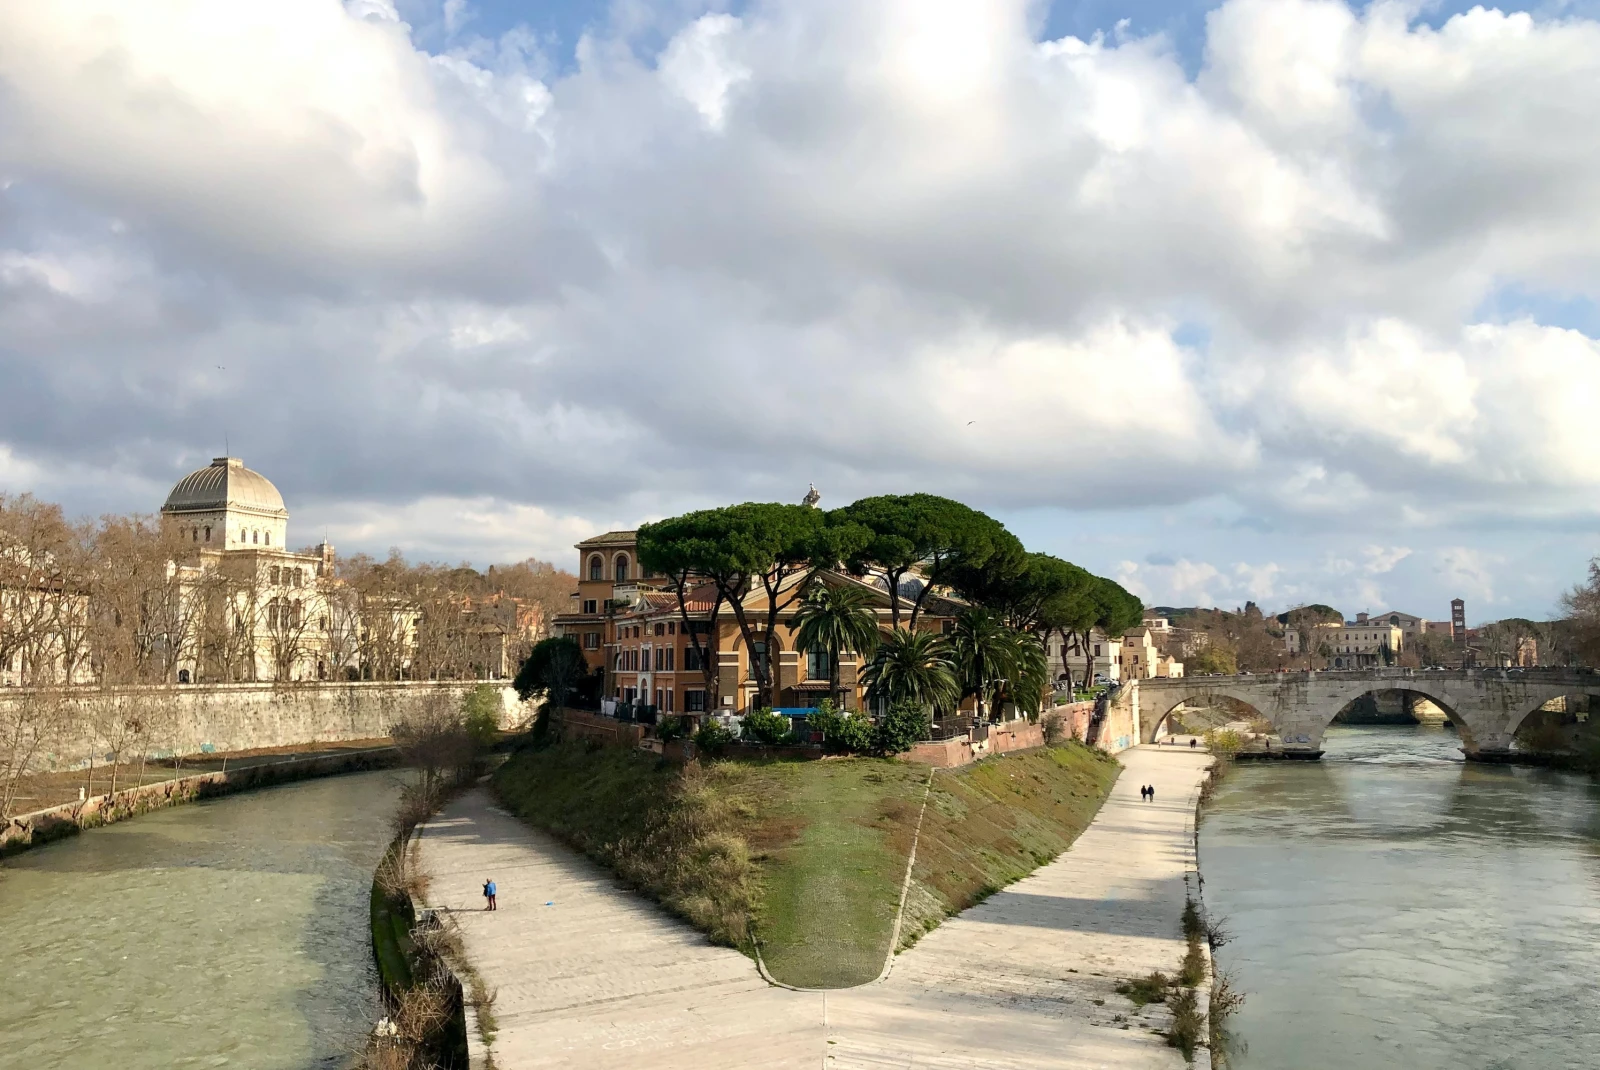 A charming and historic islet in the Tiber River in Rome.